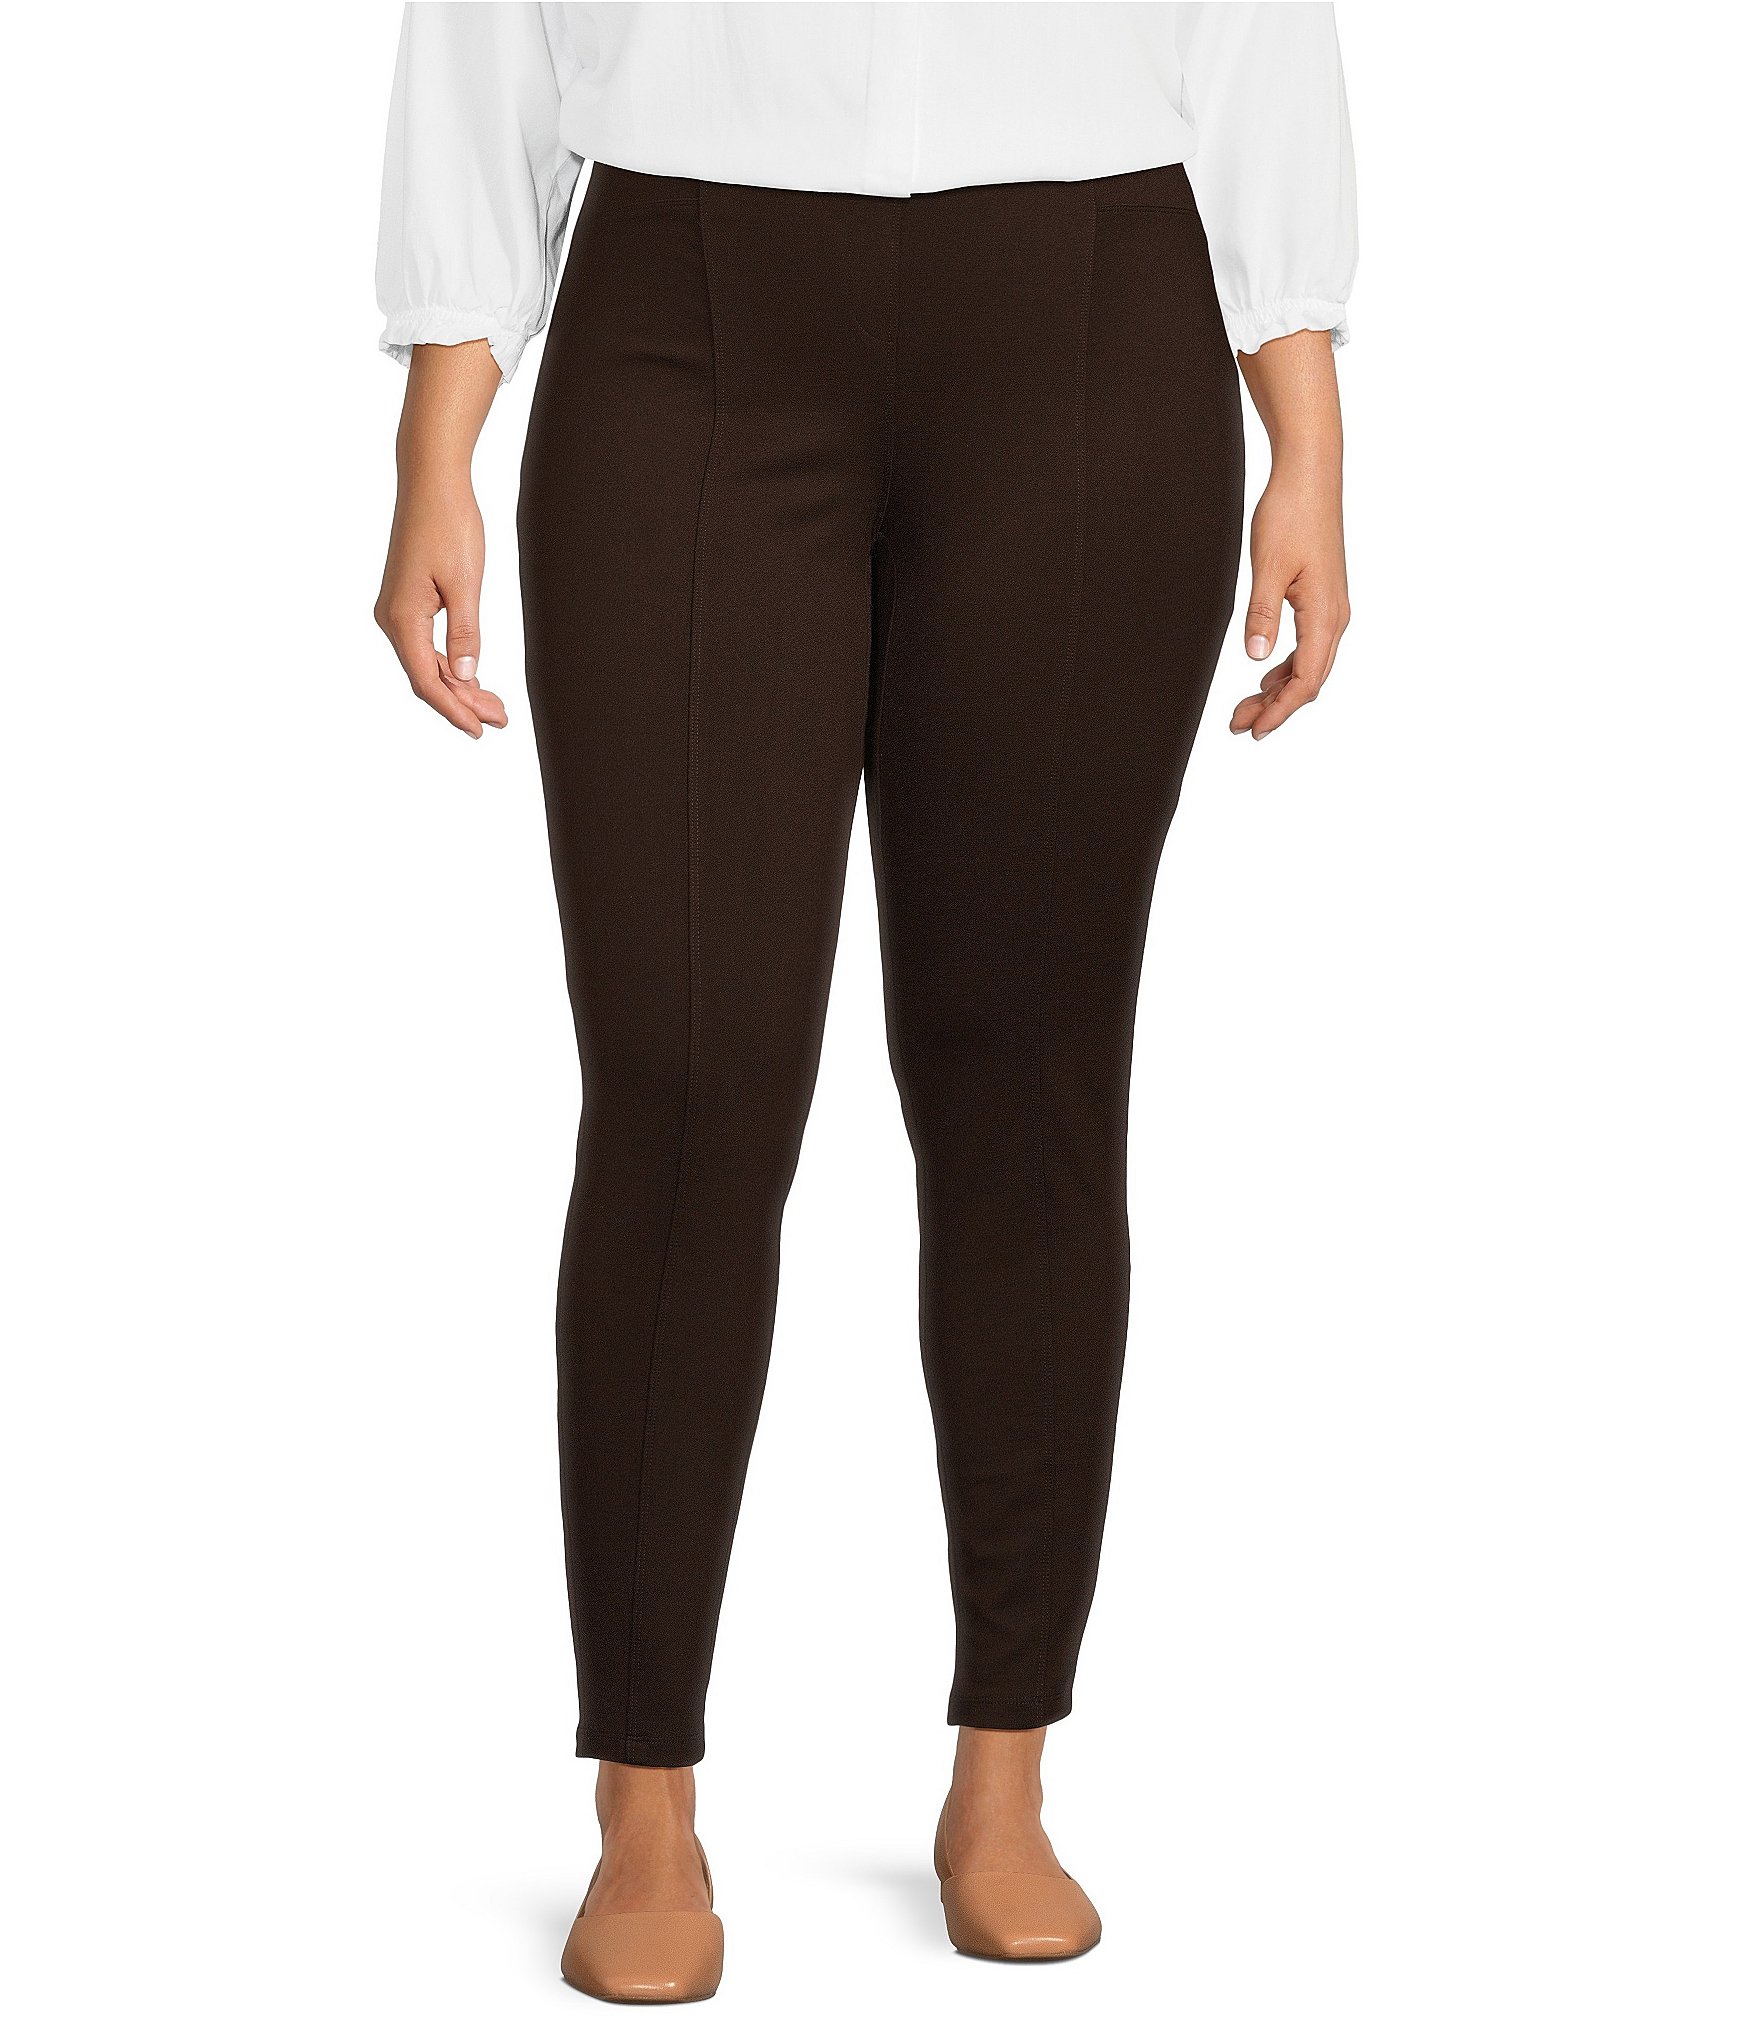 Intro Plus Size Bella Solid Double Knit Slim Her Leggings